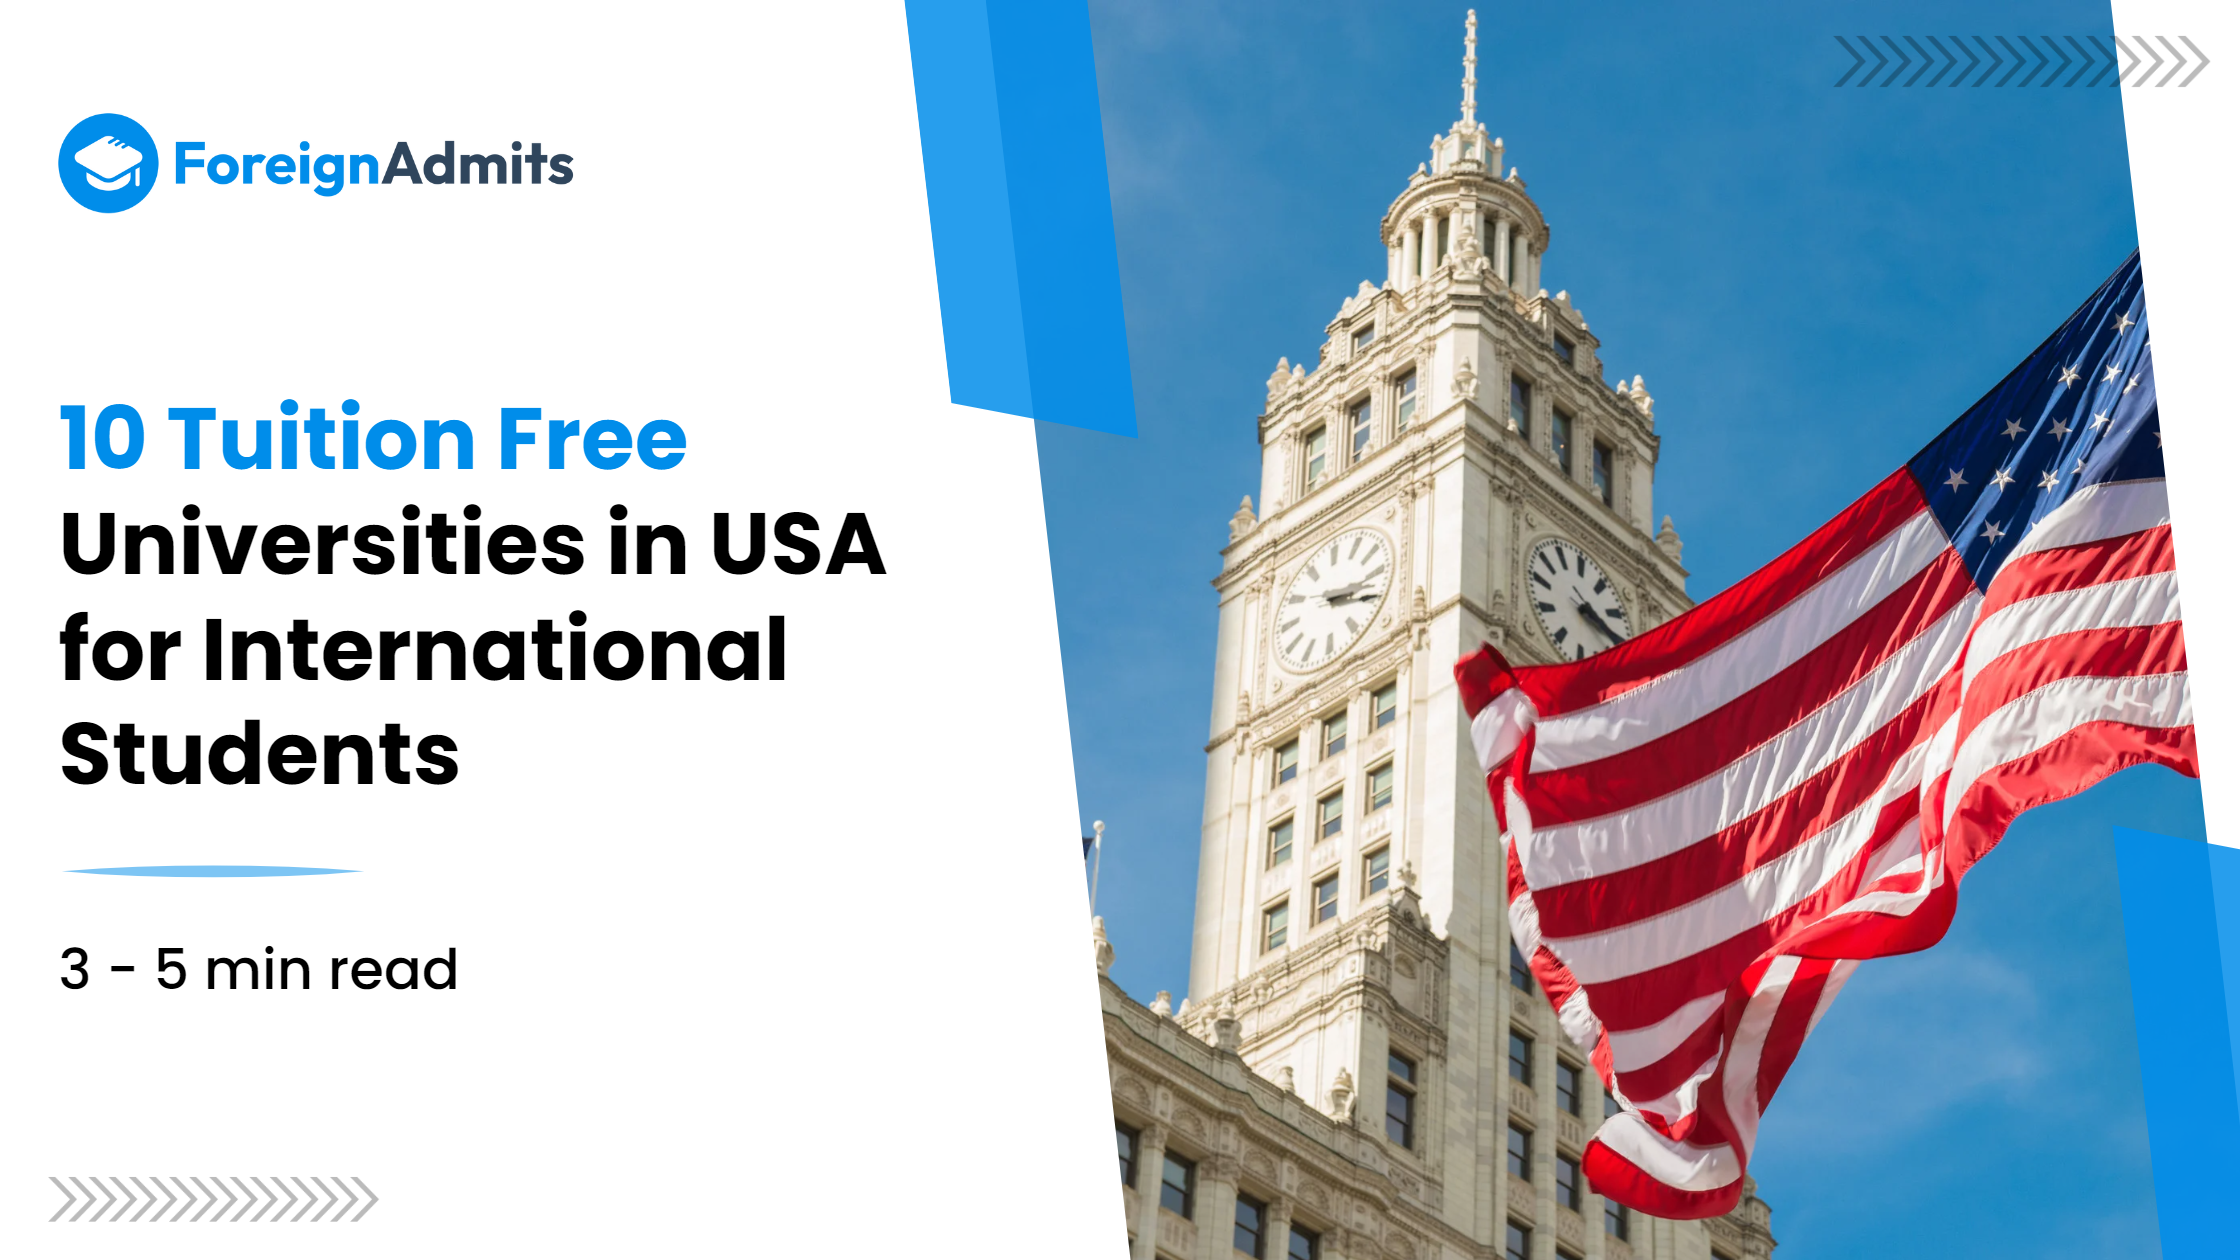 10 Tuition-Free Universities in the USA for International Students 2023